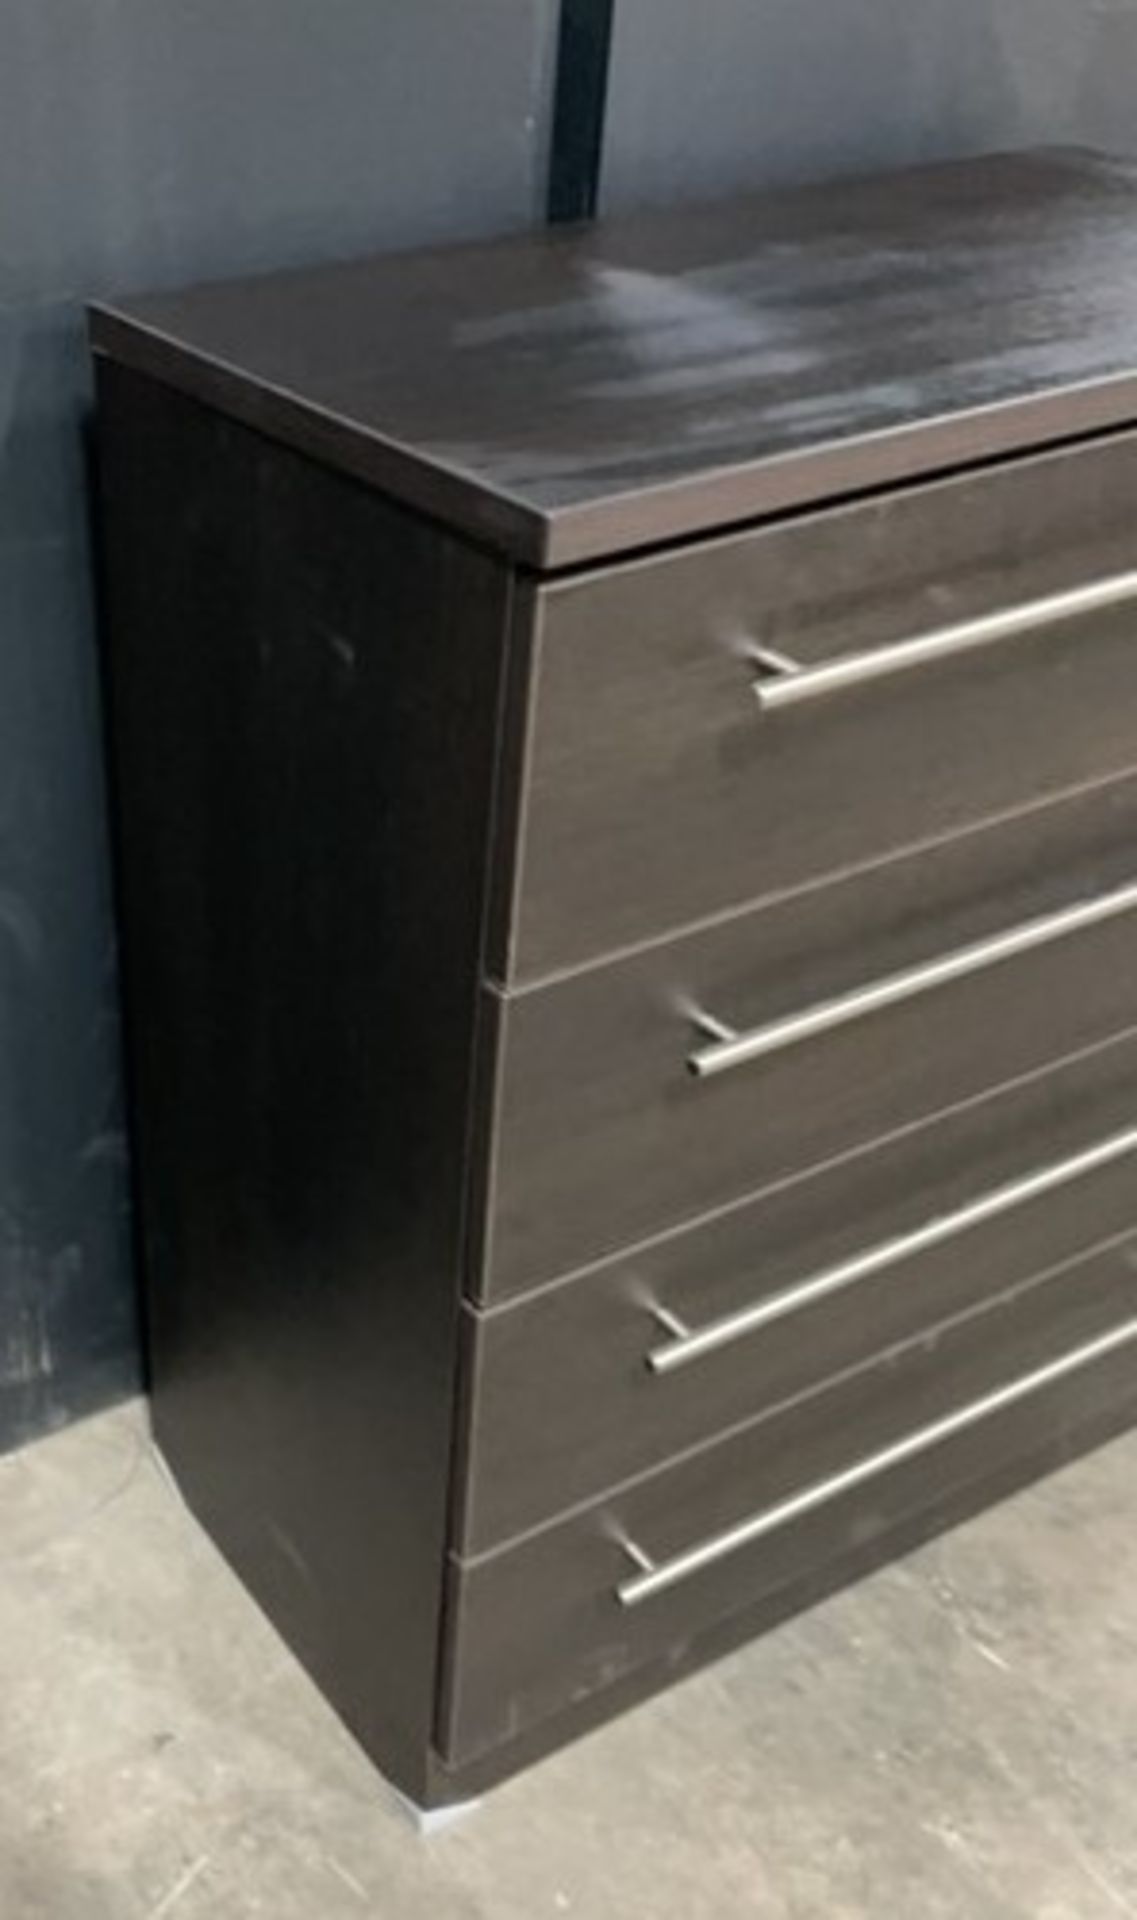 8 Drawer Chest of Drawers | Size: 88cm x 39cm x 64cm - Image 3 of 3